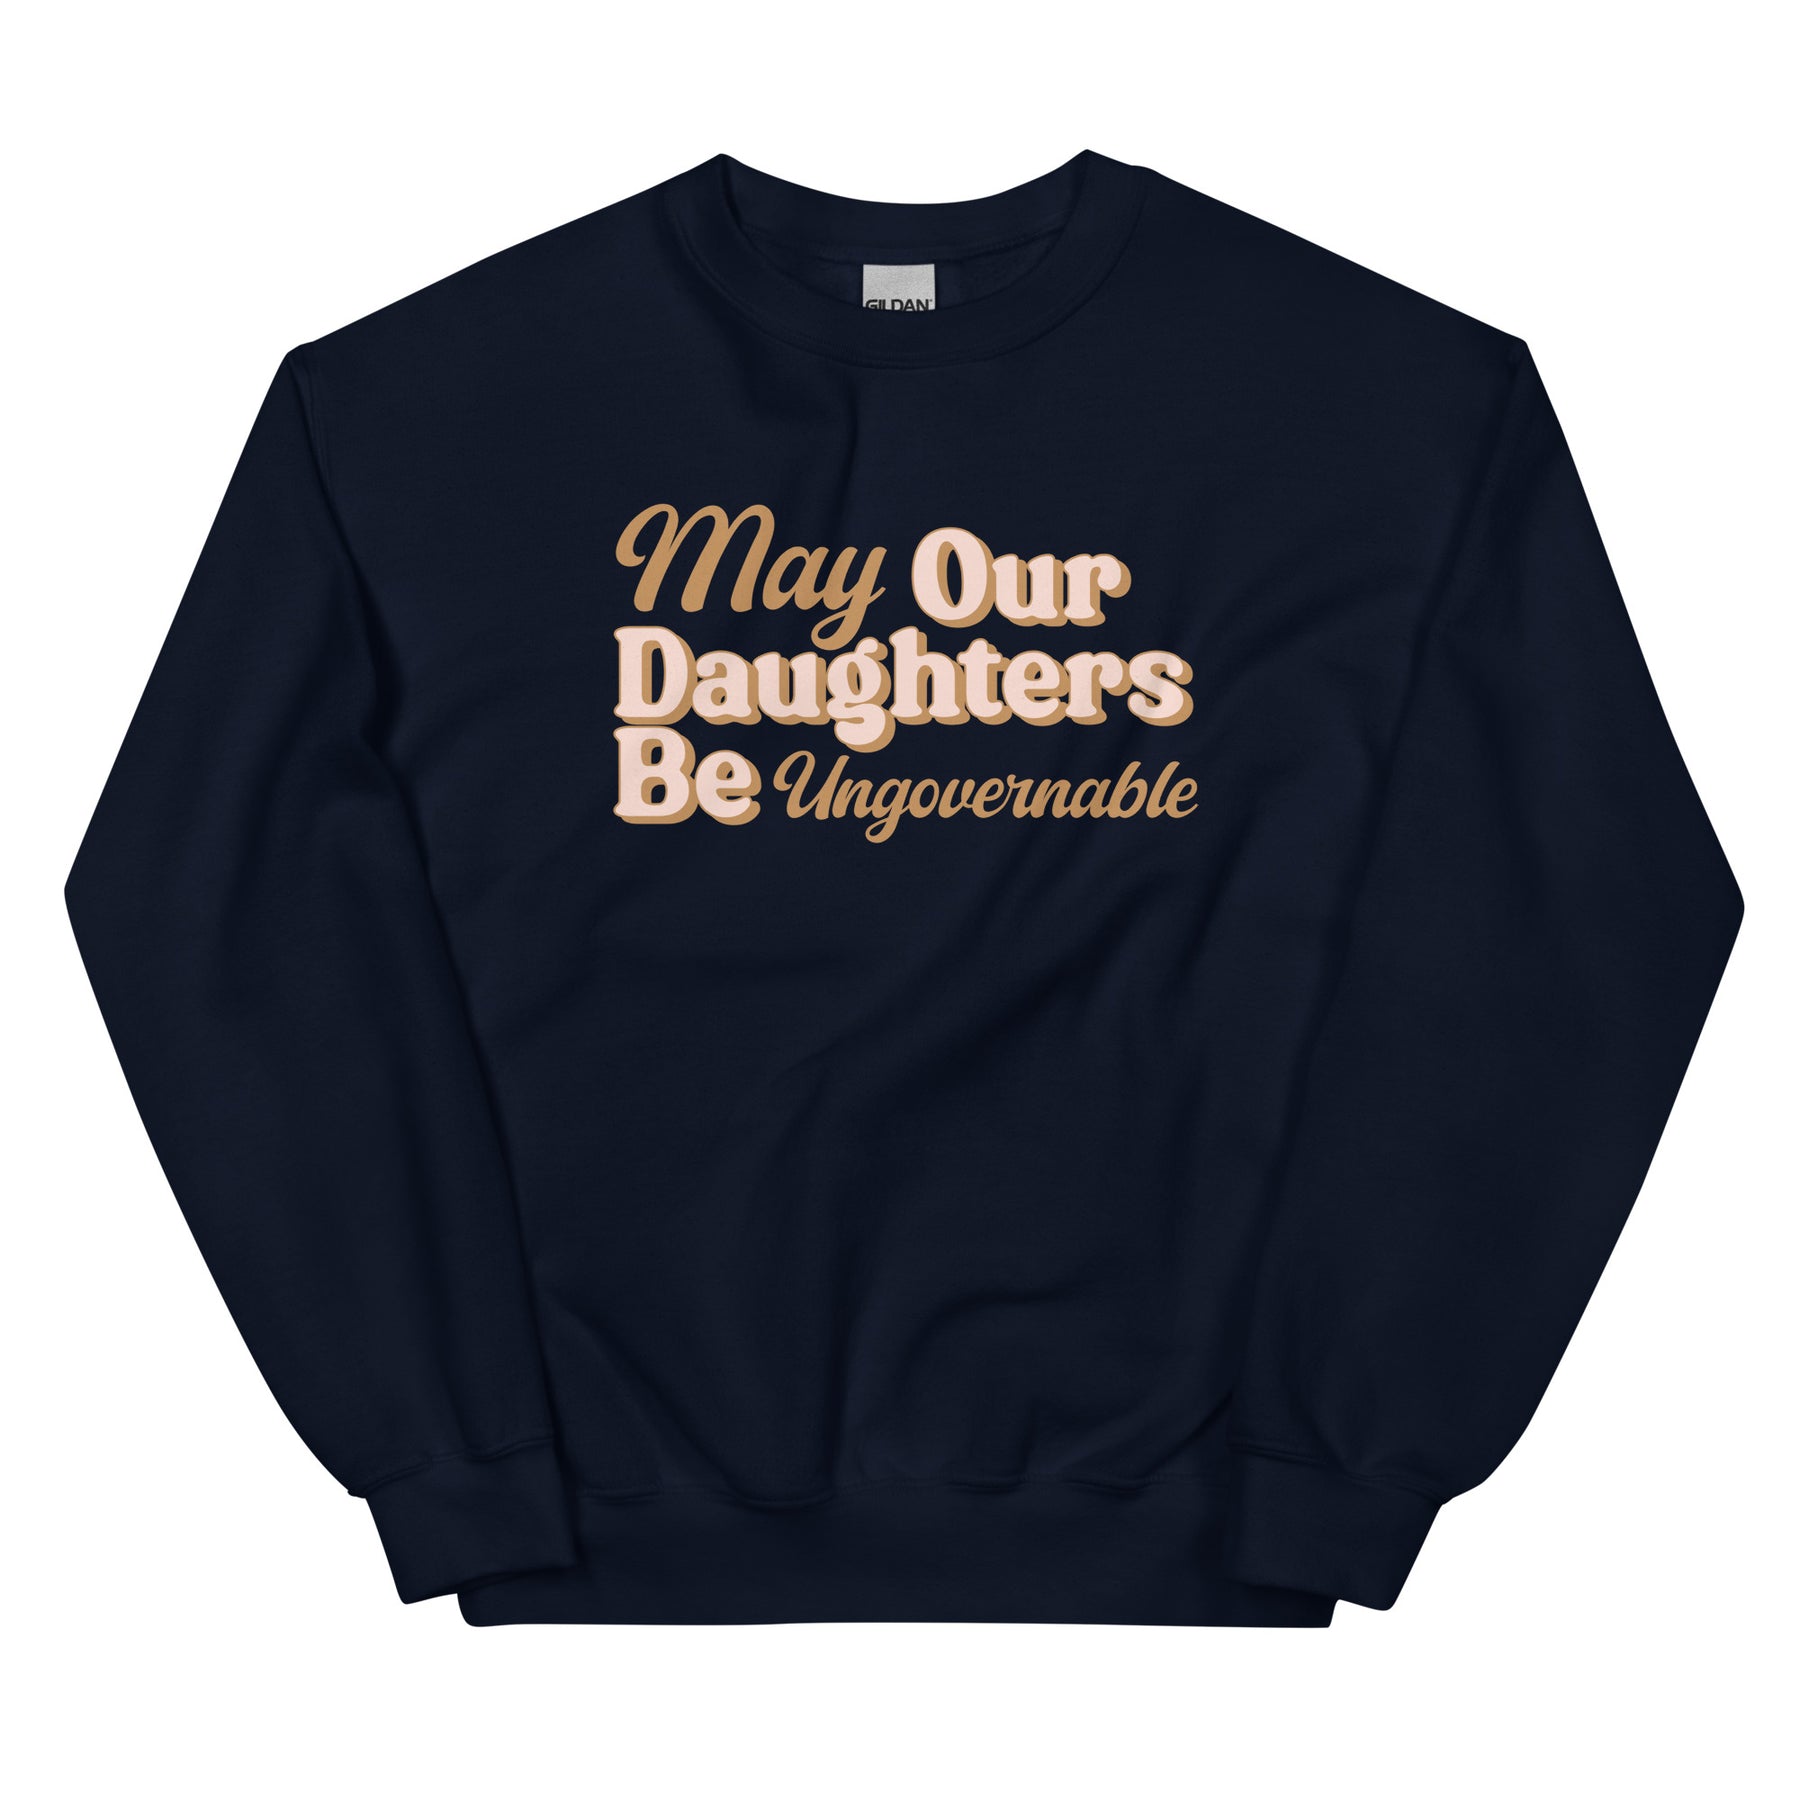 May Our Daughters Be Ungovernable Sweatshirt